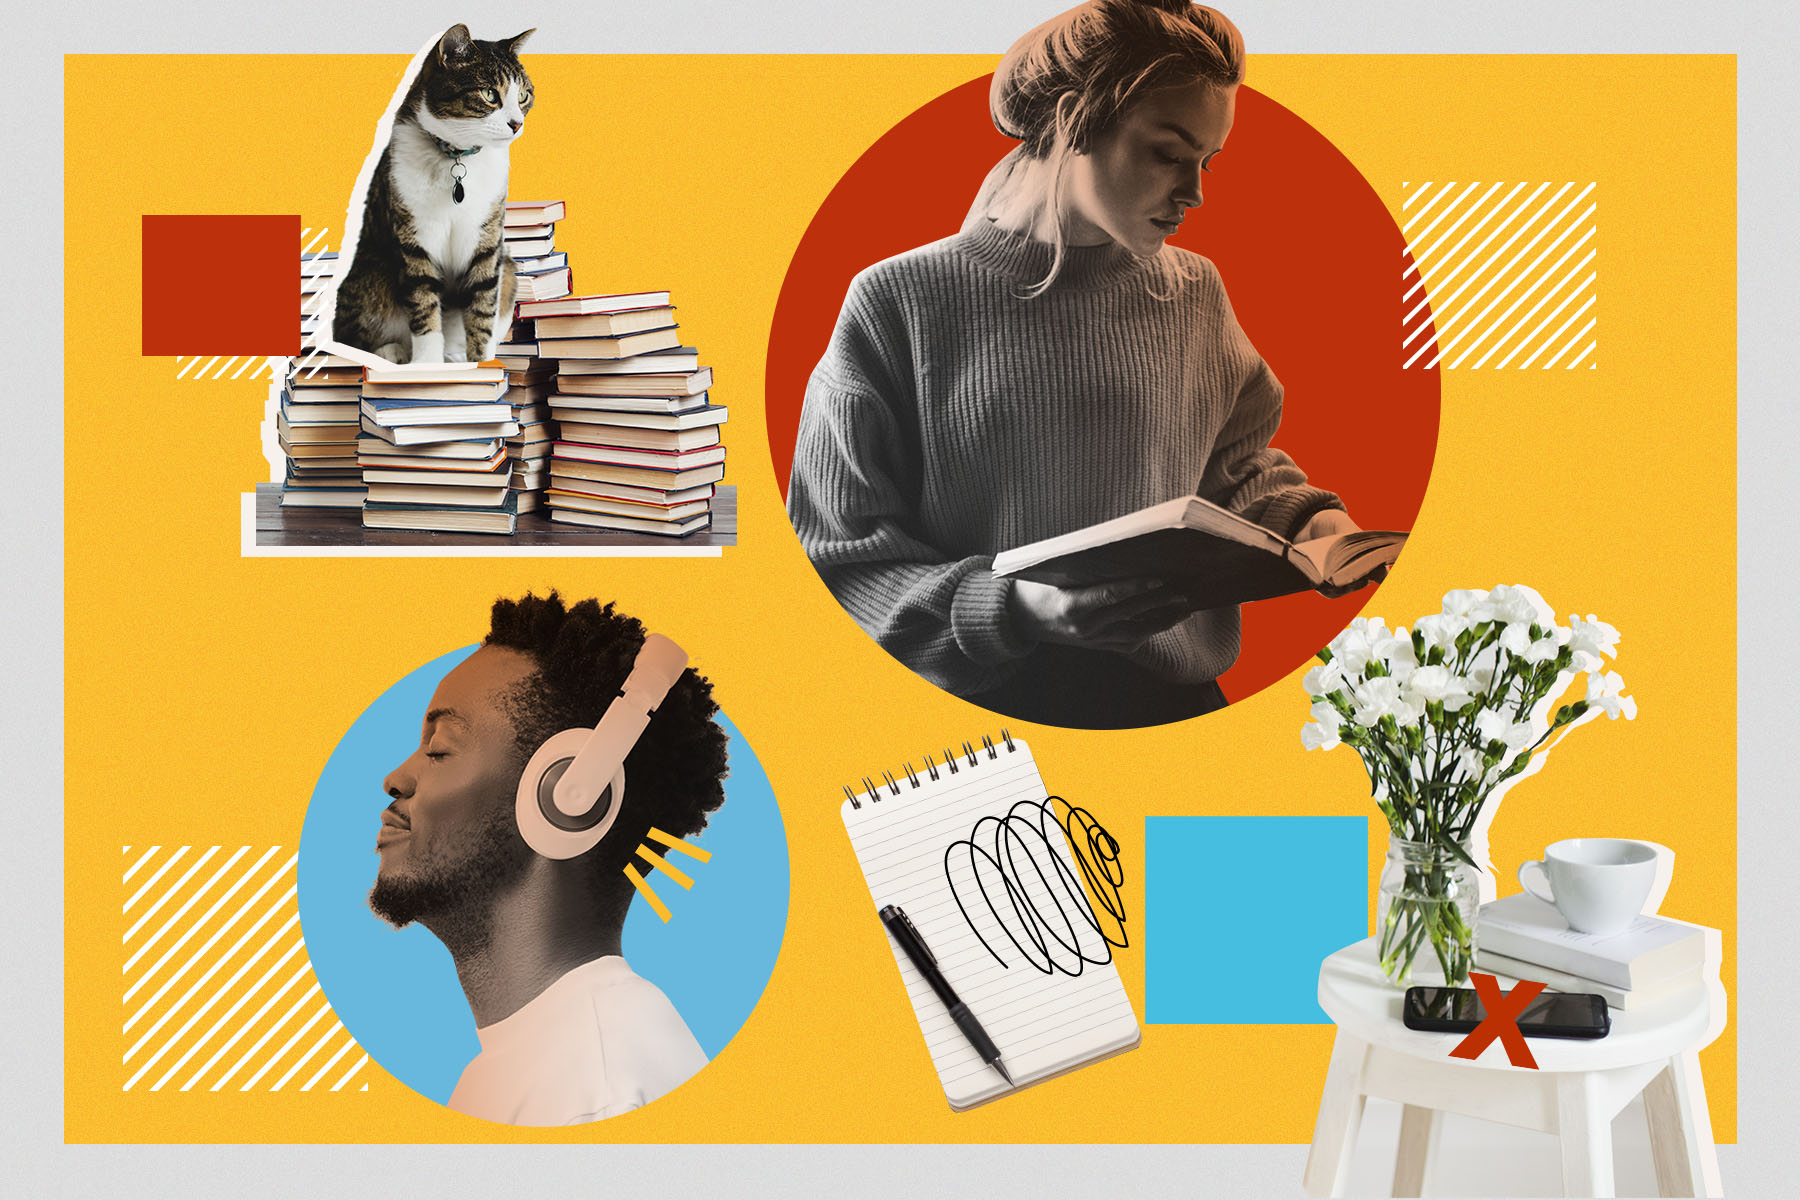 Collage of images, including a cat sitting on a stack of books, a woman in a sweater reading a book, a man with headphones on and a bedside table with flowers on it, and a phone with a red cross over the phone.